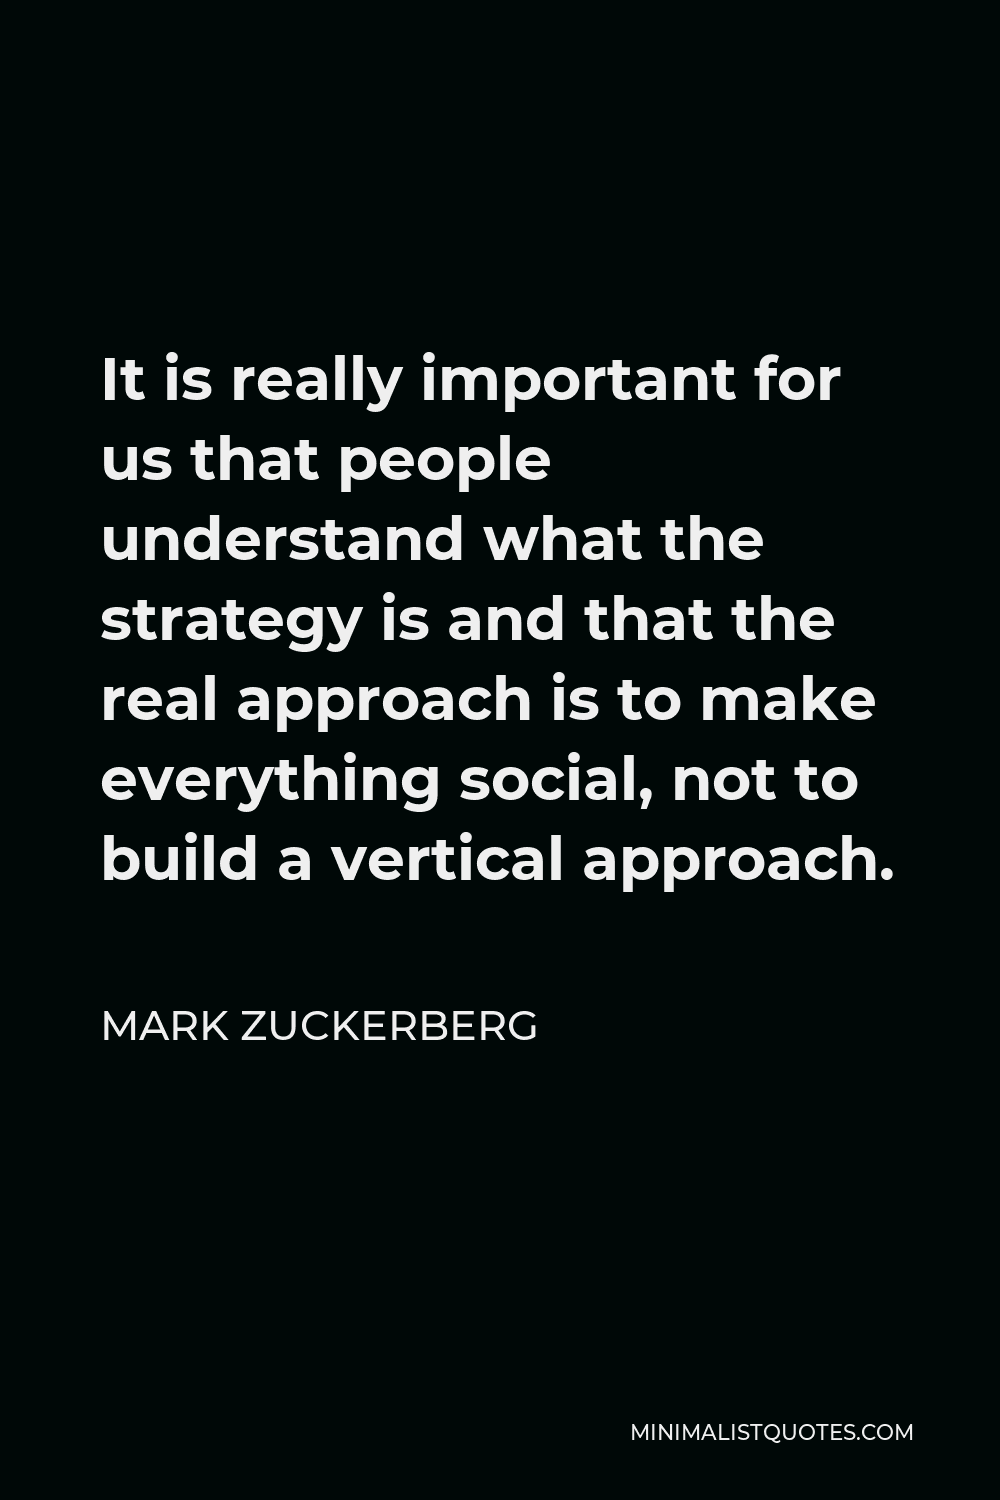 Mark Zuckerberg Quote - It is really important for us that people understand what the strategy is and that the real approach is to make everything social, not to build a vertical approach.